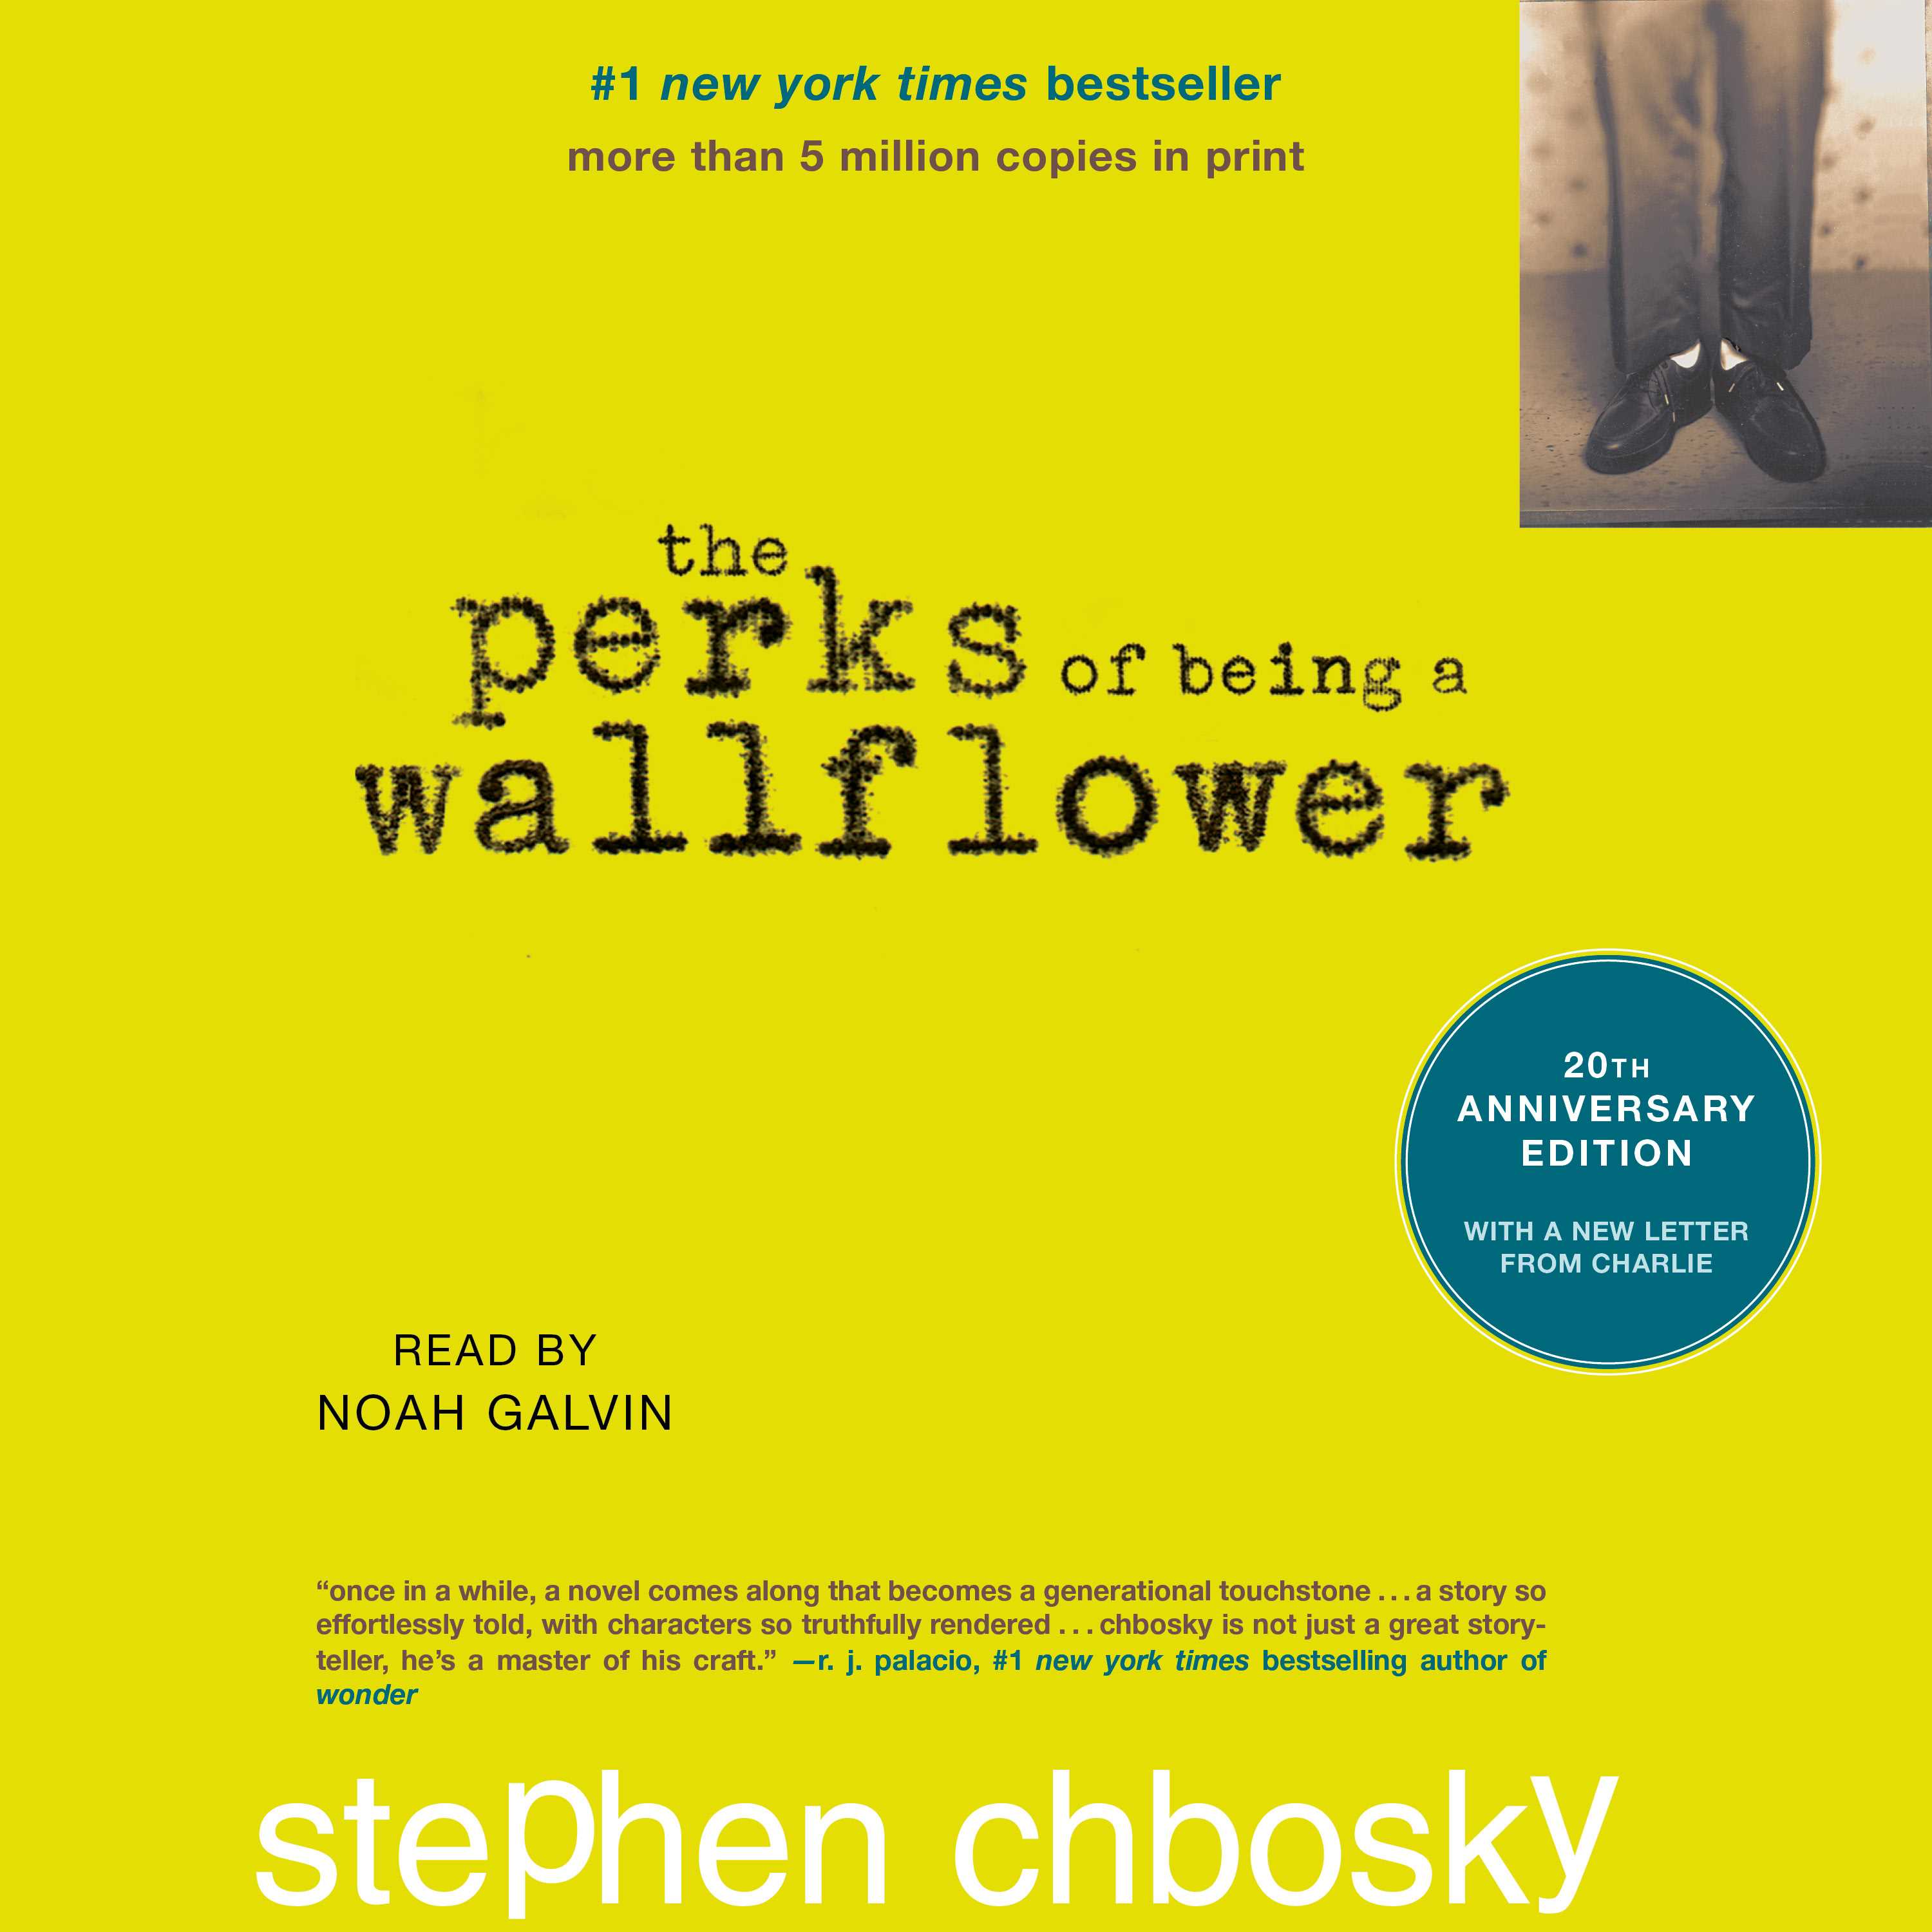 Stephen Chbosky: The perks of being a wallflower (1999)